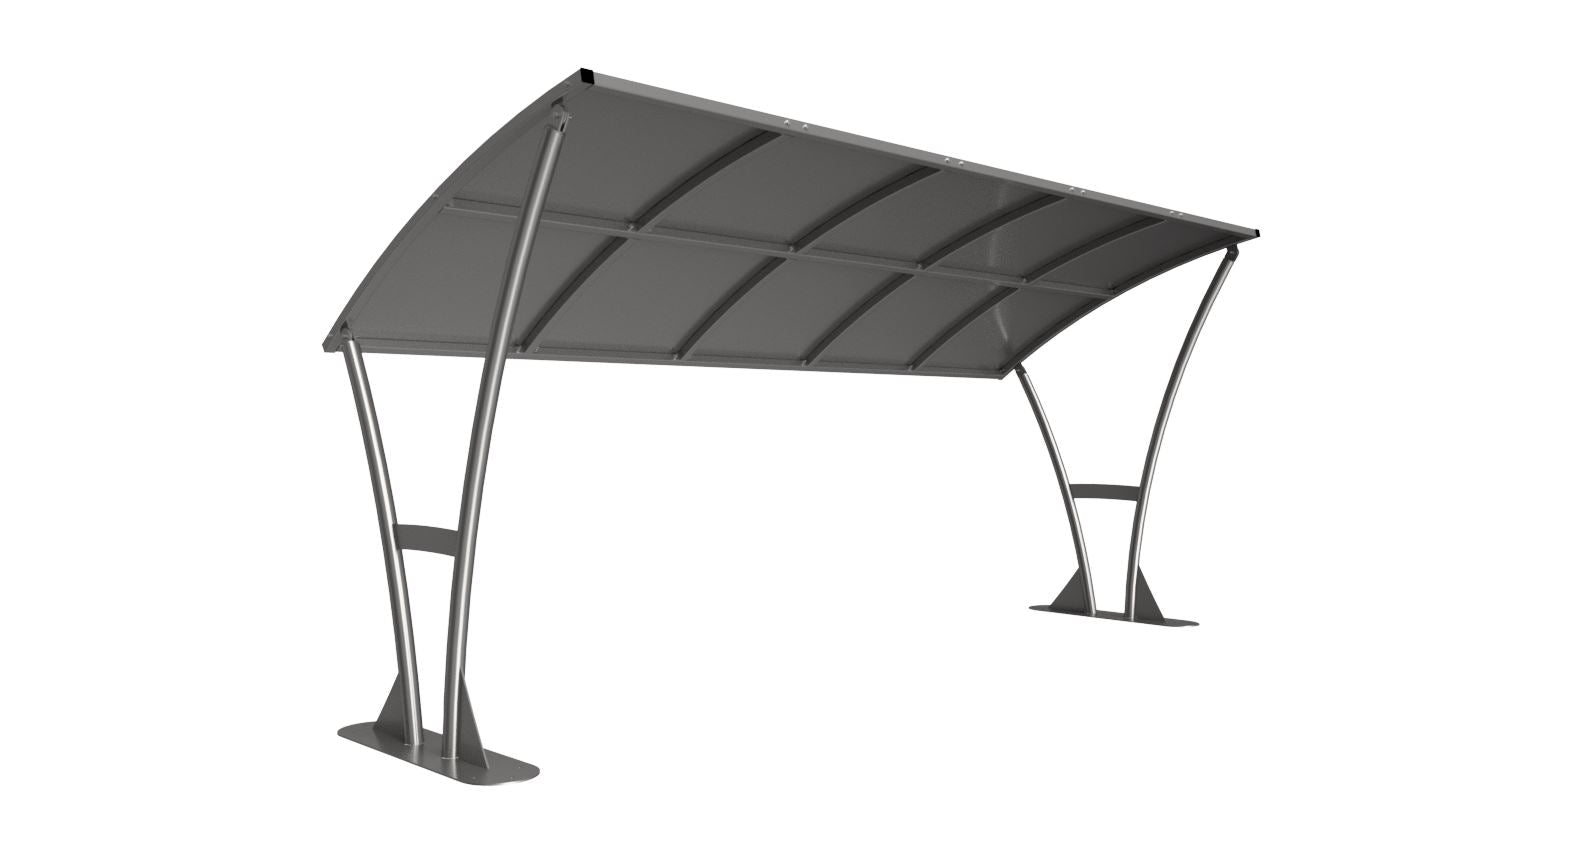 Newton Cycle Shelter Galvanised Steel Frame – Galvanised Roof Open Sided